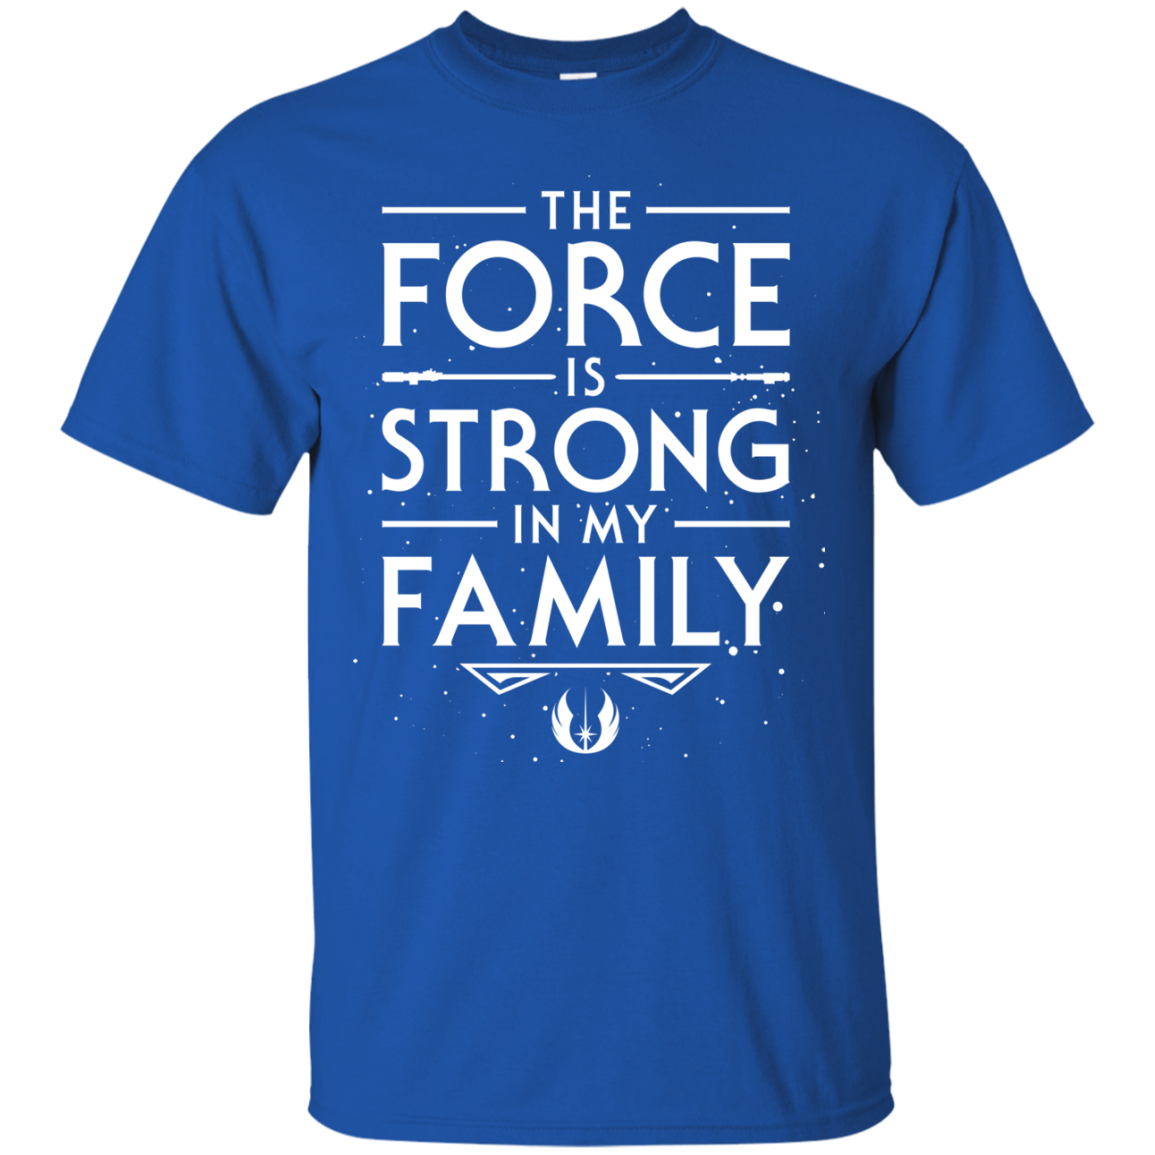 The Force is Strong in my Family T-Shirt